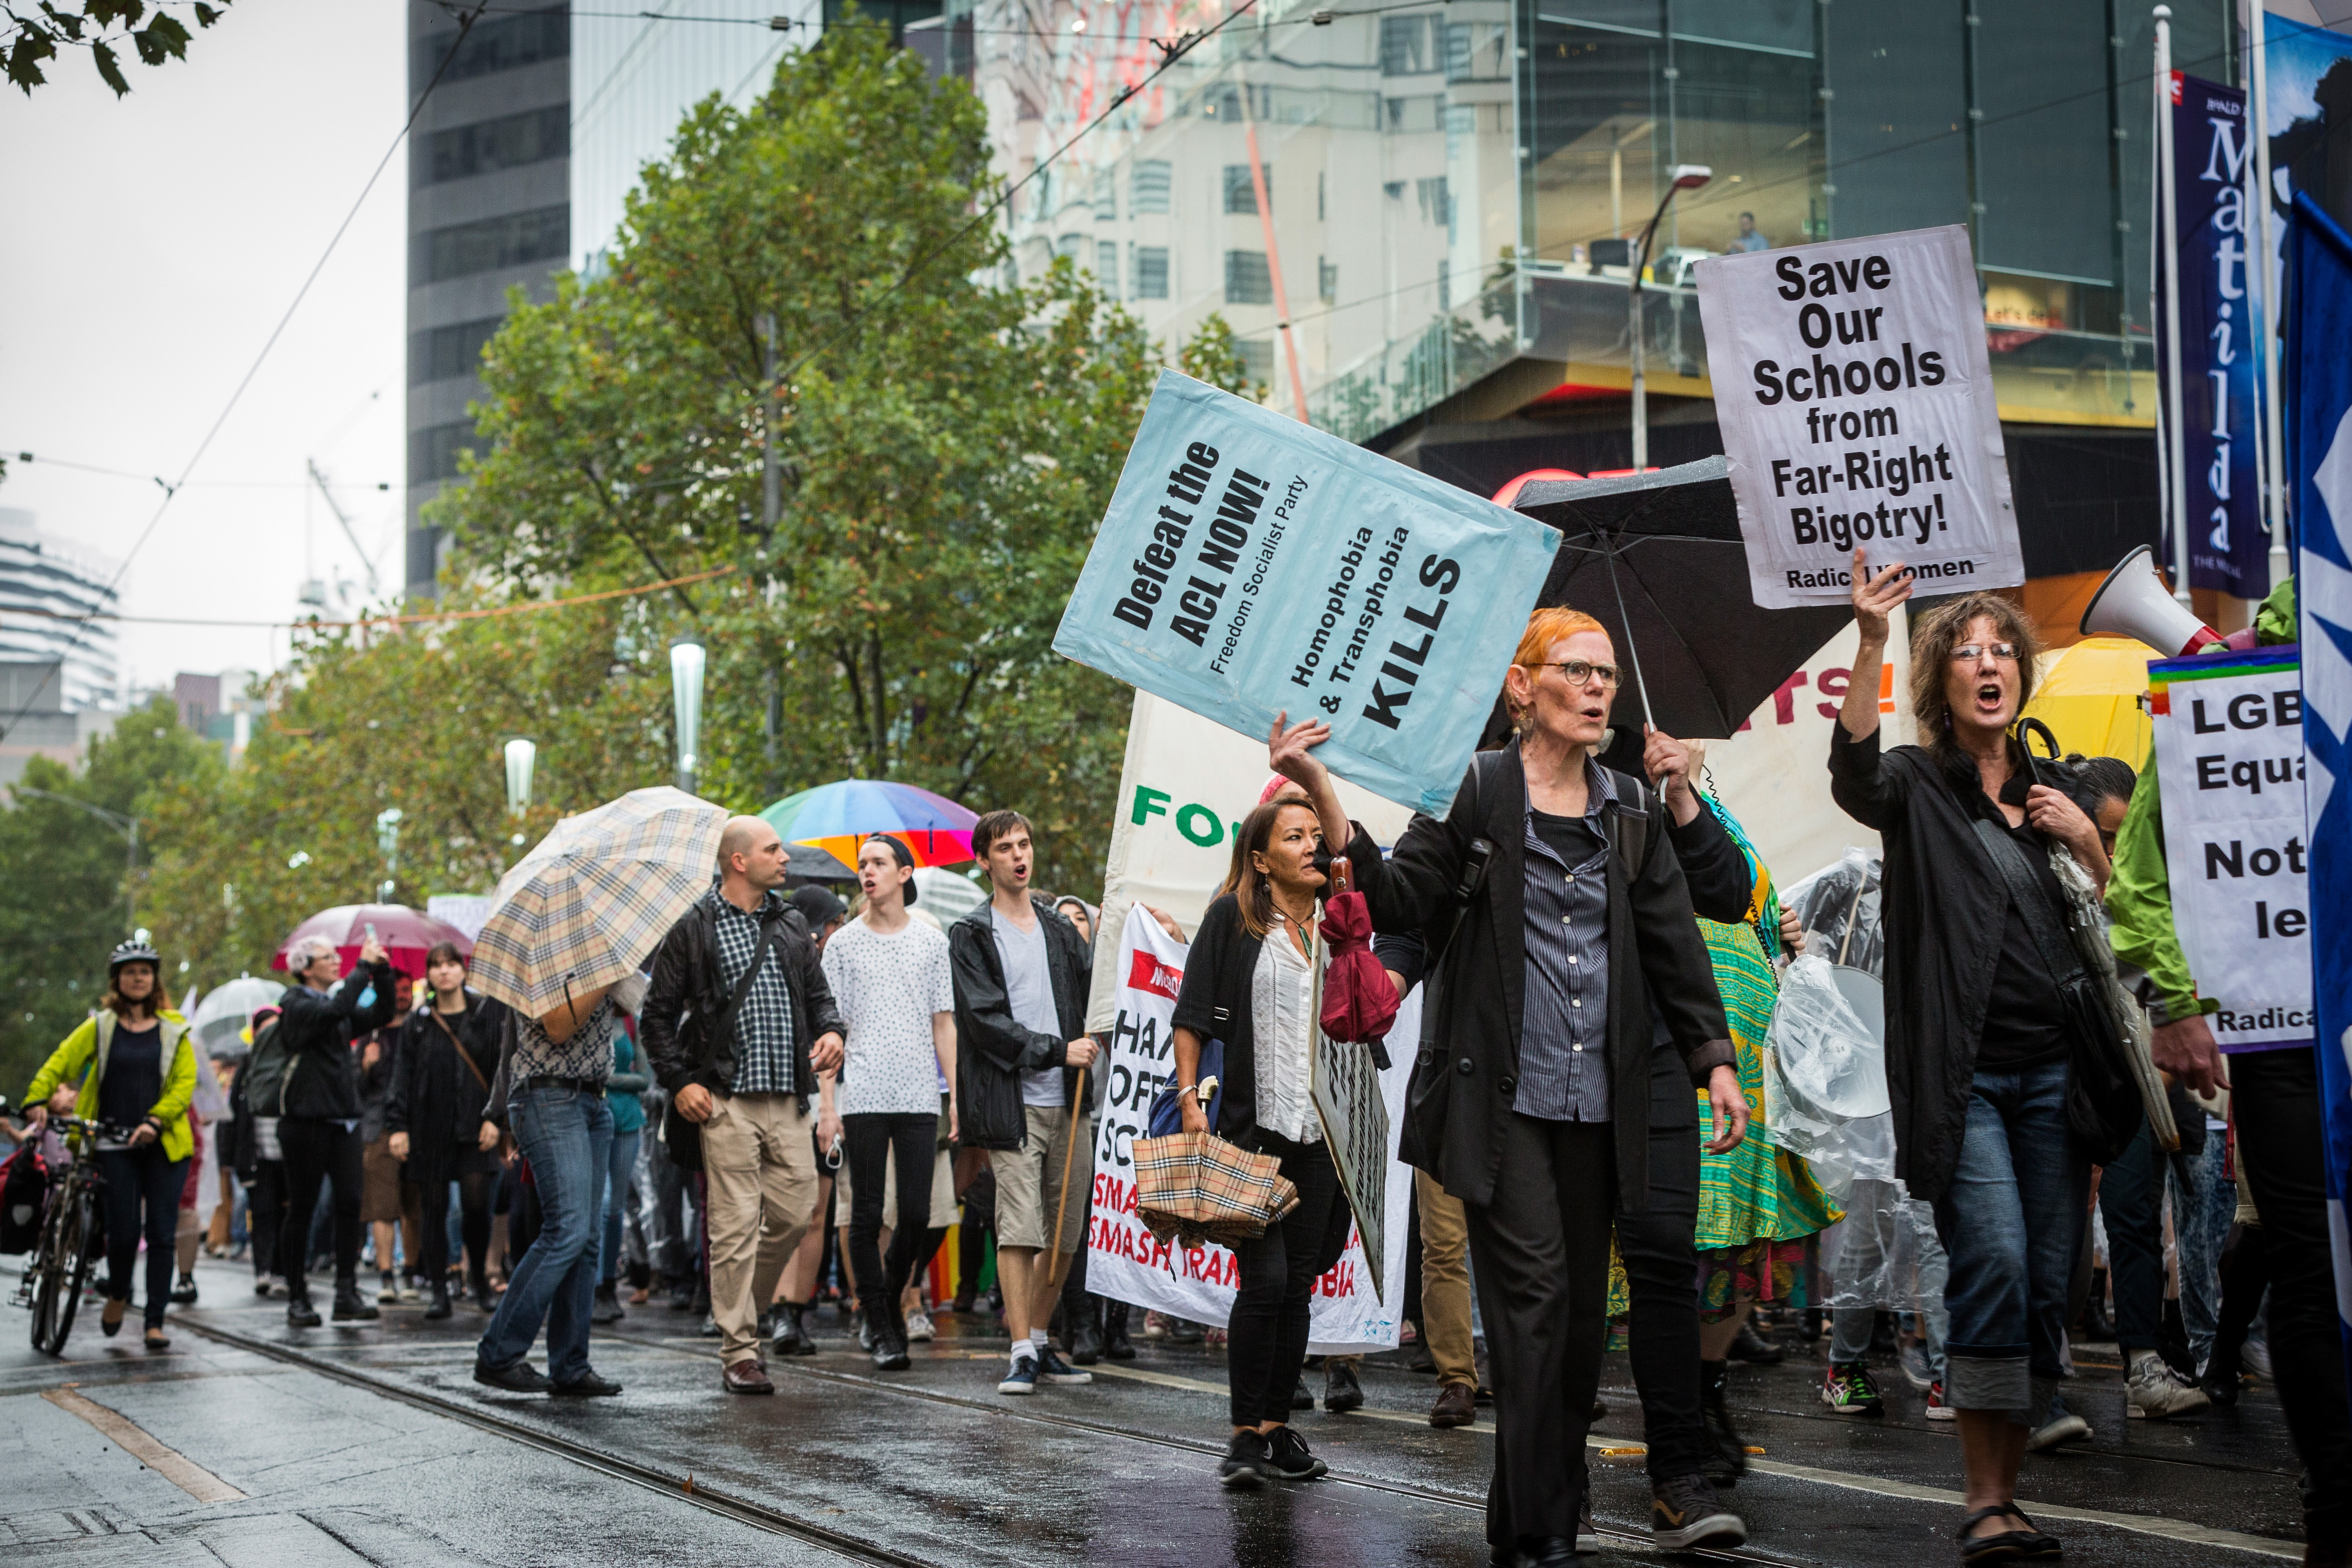 rotesters attend the Hands Off Safe Schools Rally on Swanston Street on March 10, 2016 in Melbourne, Australia. The Hands Off Safe School has been designed as a resource for teachers and students to assist with issues of homophobia and bullying. (Photo by Chris Hopkins/Getty Images)